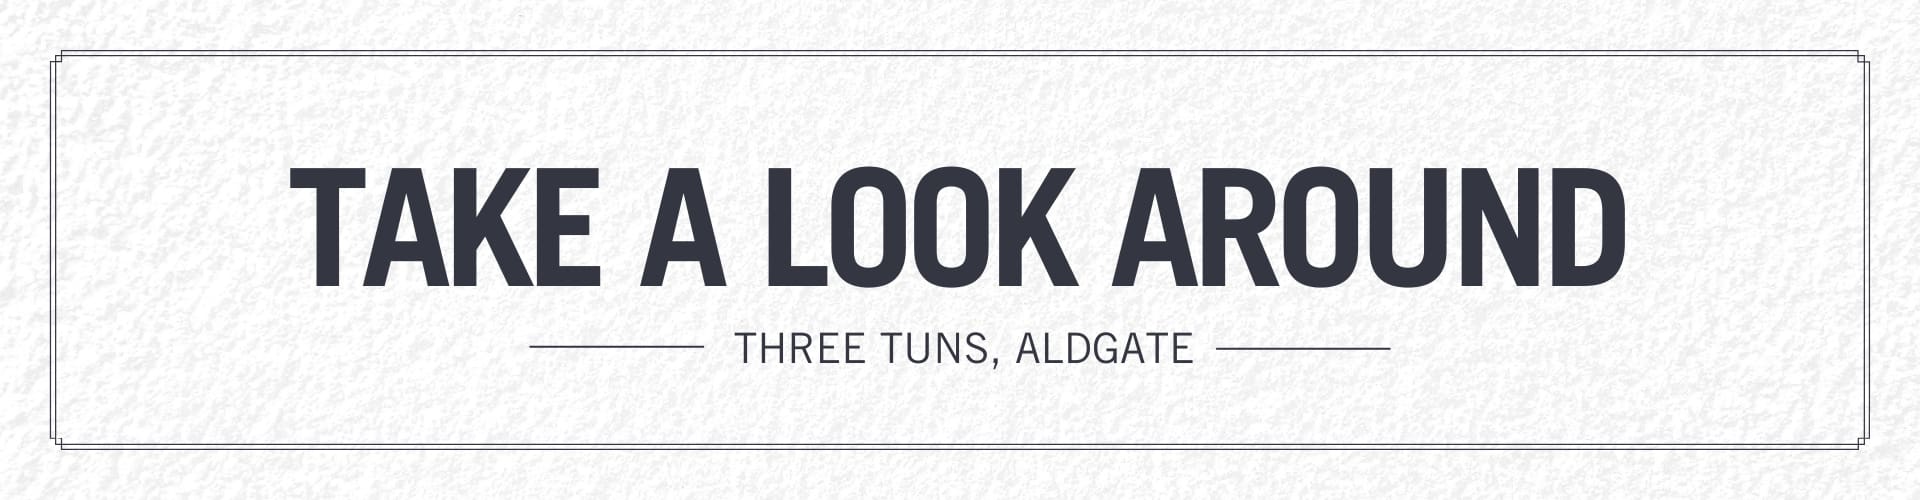 Take a look around the Three Tuns Aldgate